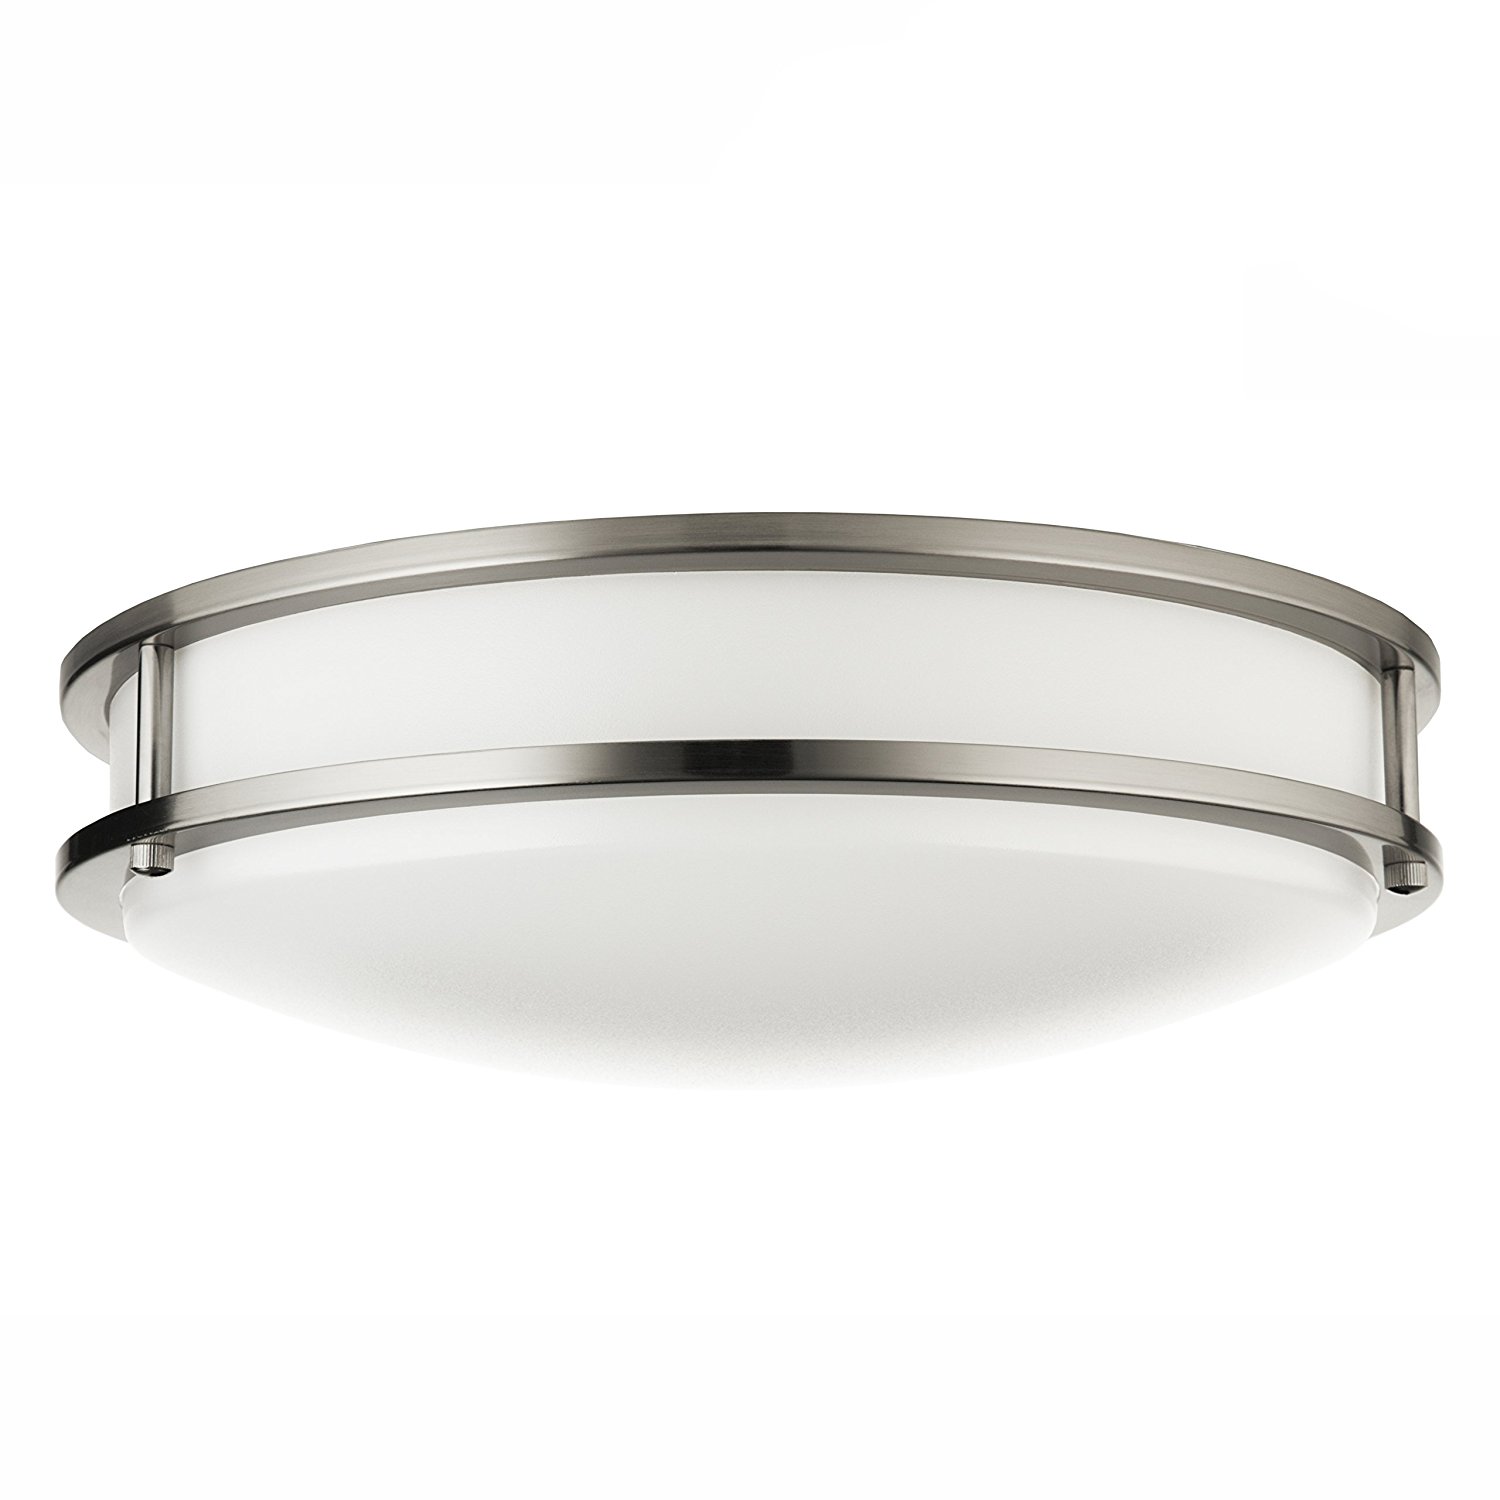 Hyperikon LED Flush Mount Ceiling Light, 14", 25W (100W equivalent), 1840lm, 4000K (Daylight Glow), 120° Beam Angle, 120V, UL and ENERGY STAR Listed, 14-Inch Flush Mount, Dimmable - (Pack of 4)